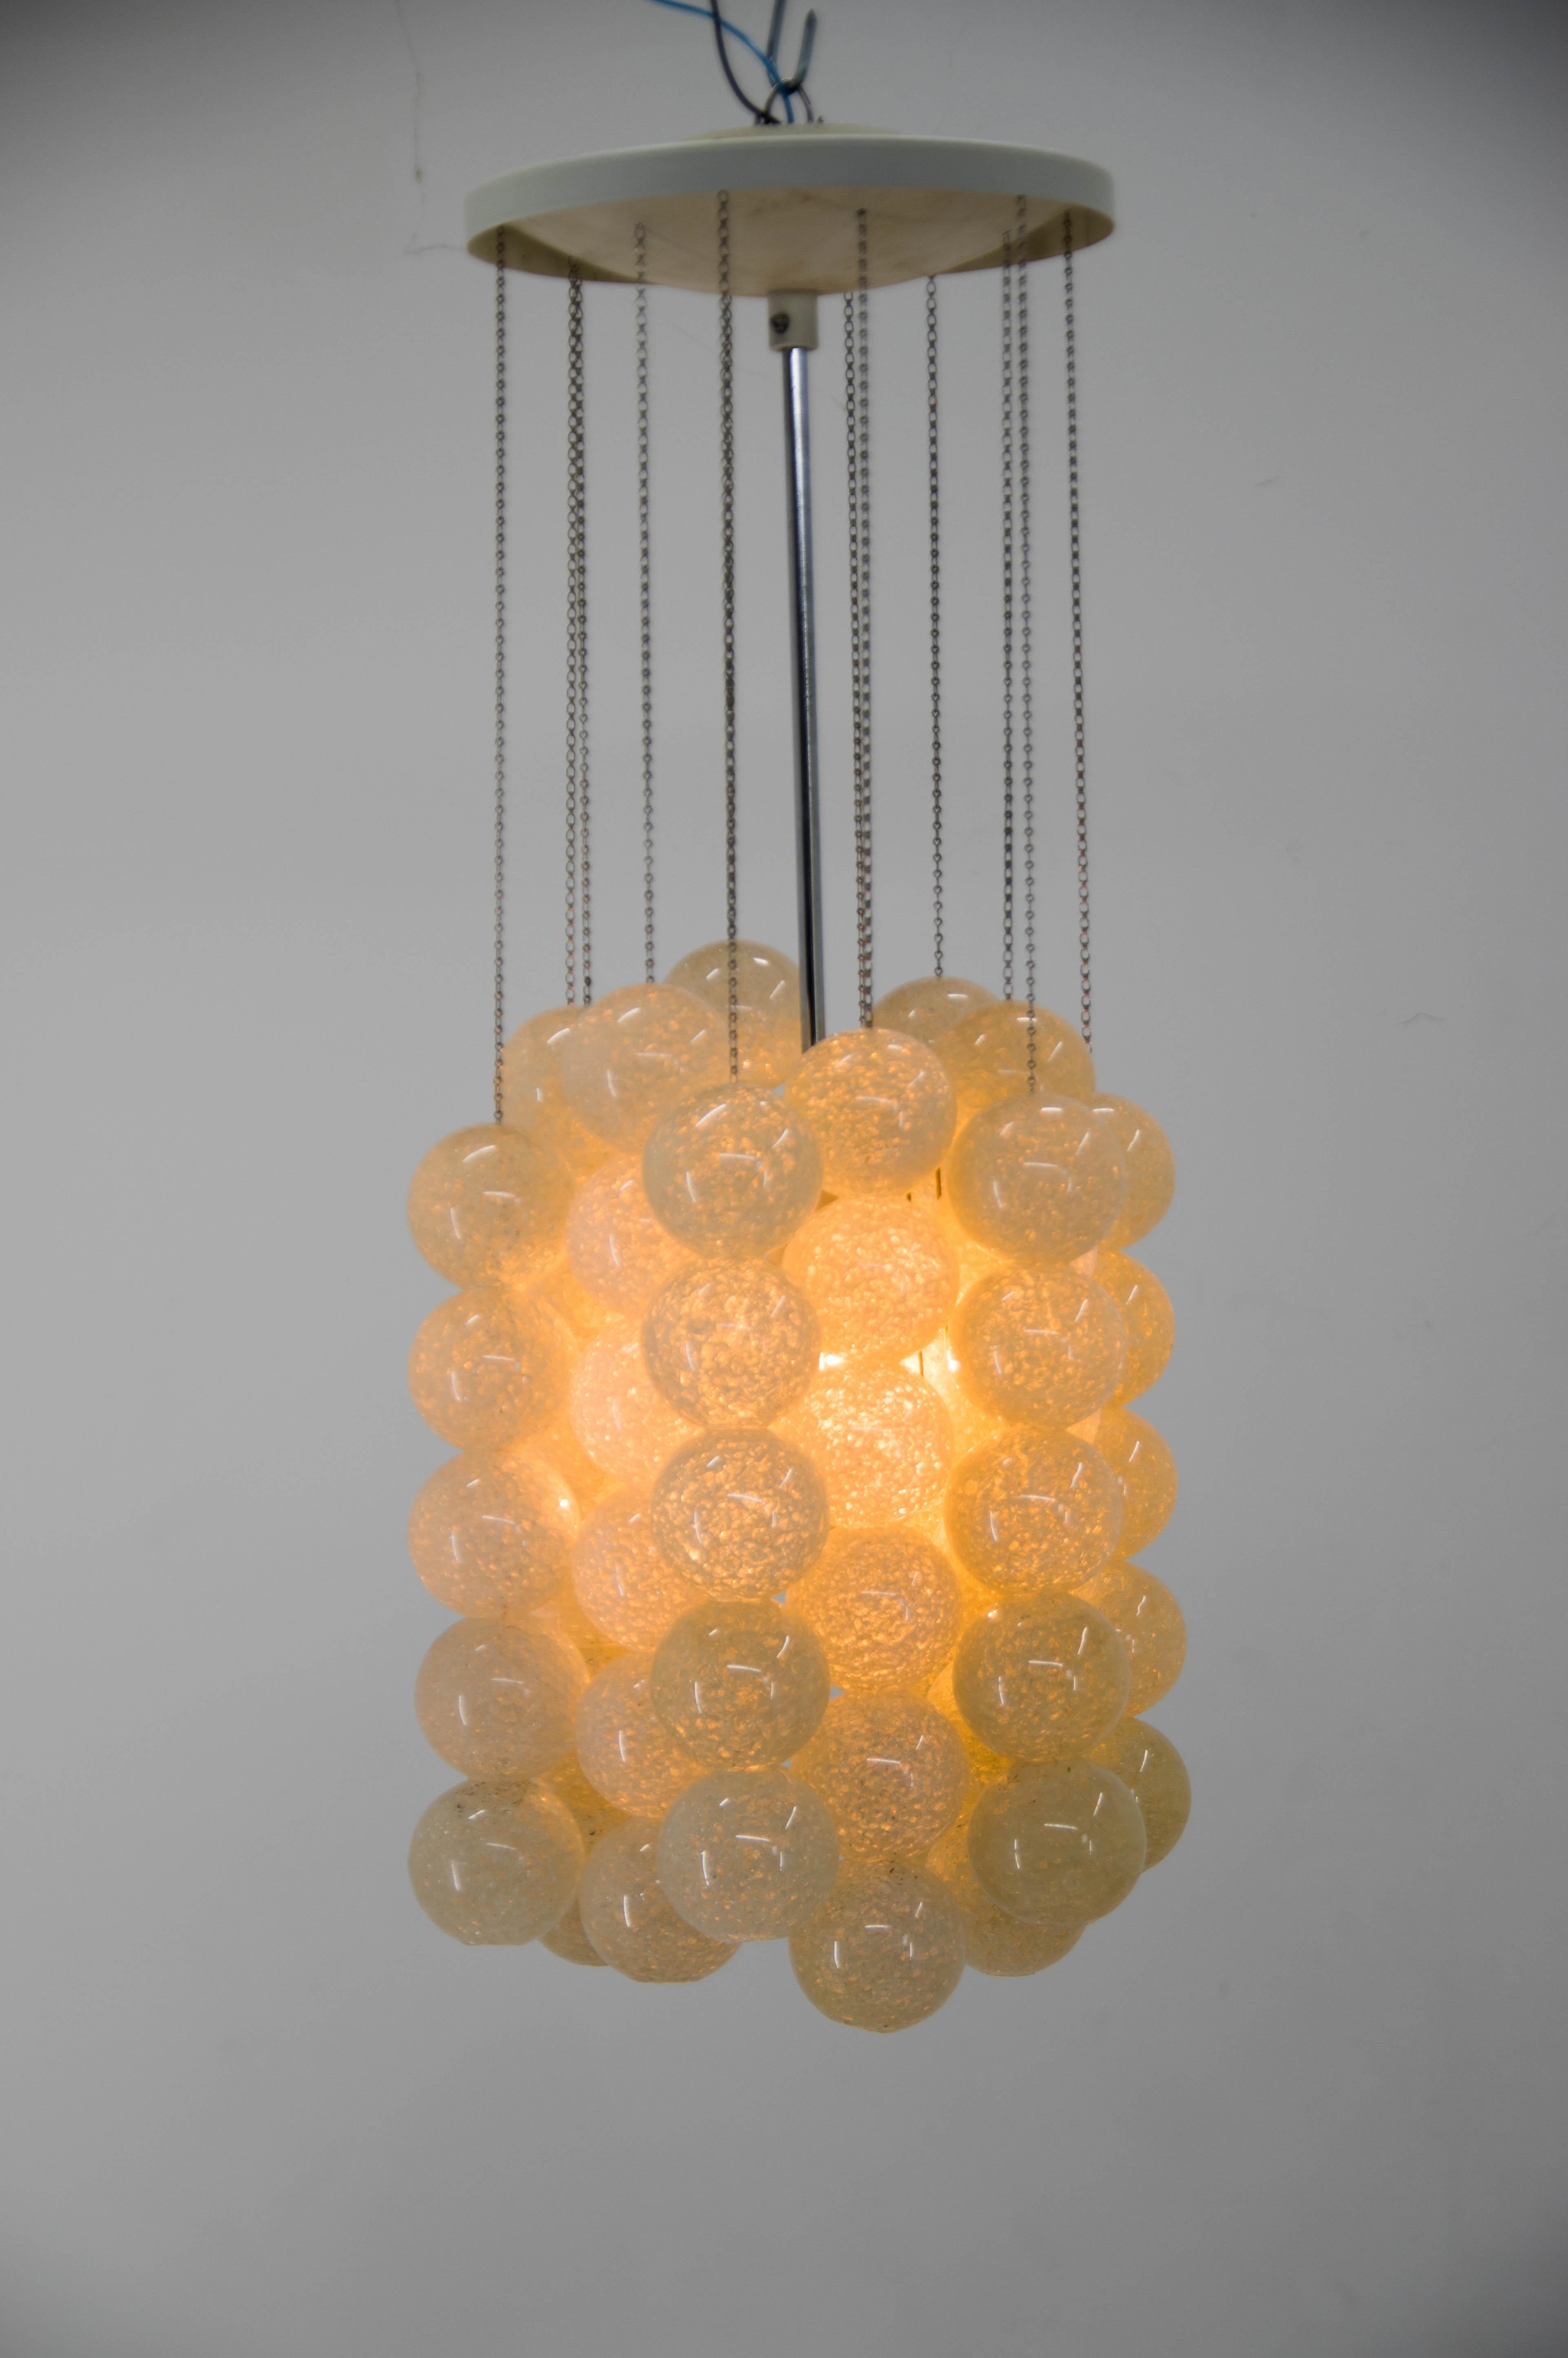 Extraordinary chandeliers by Napako, Czechoslovakia, 1970s, very good original condition.
White metal base and resin ball shade ivory color.
- 1 x 100W, E27 (E25, E26) bulb
- Marked with metal label.
US wiring compatible.